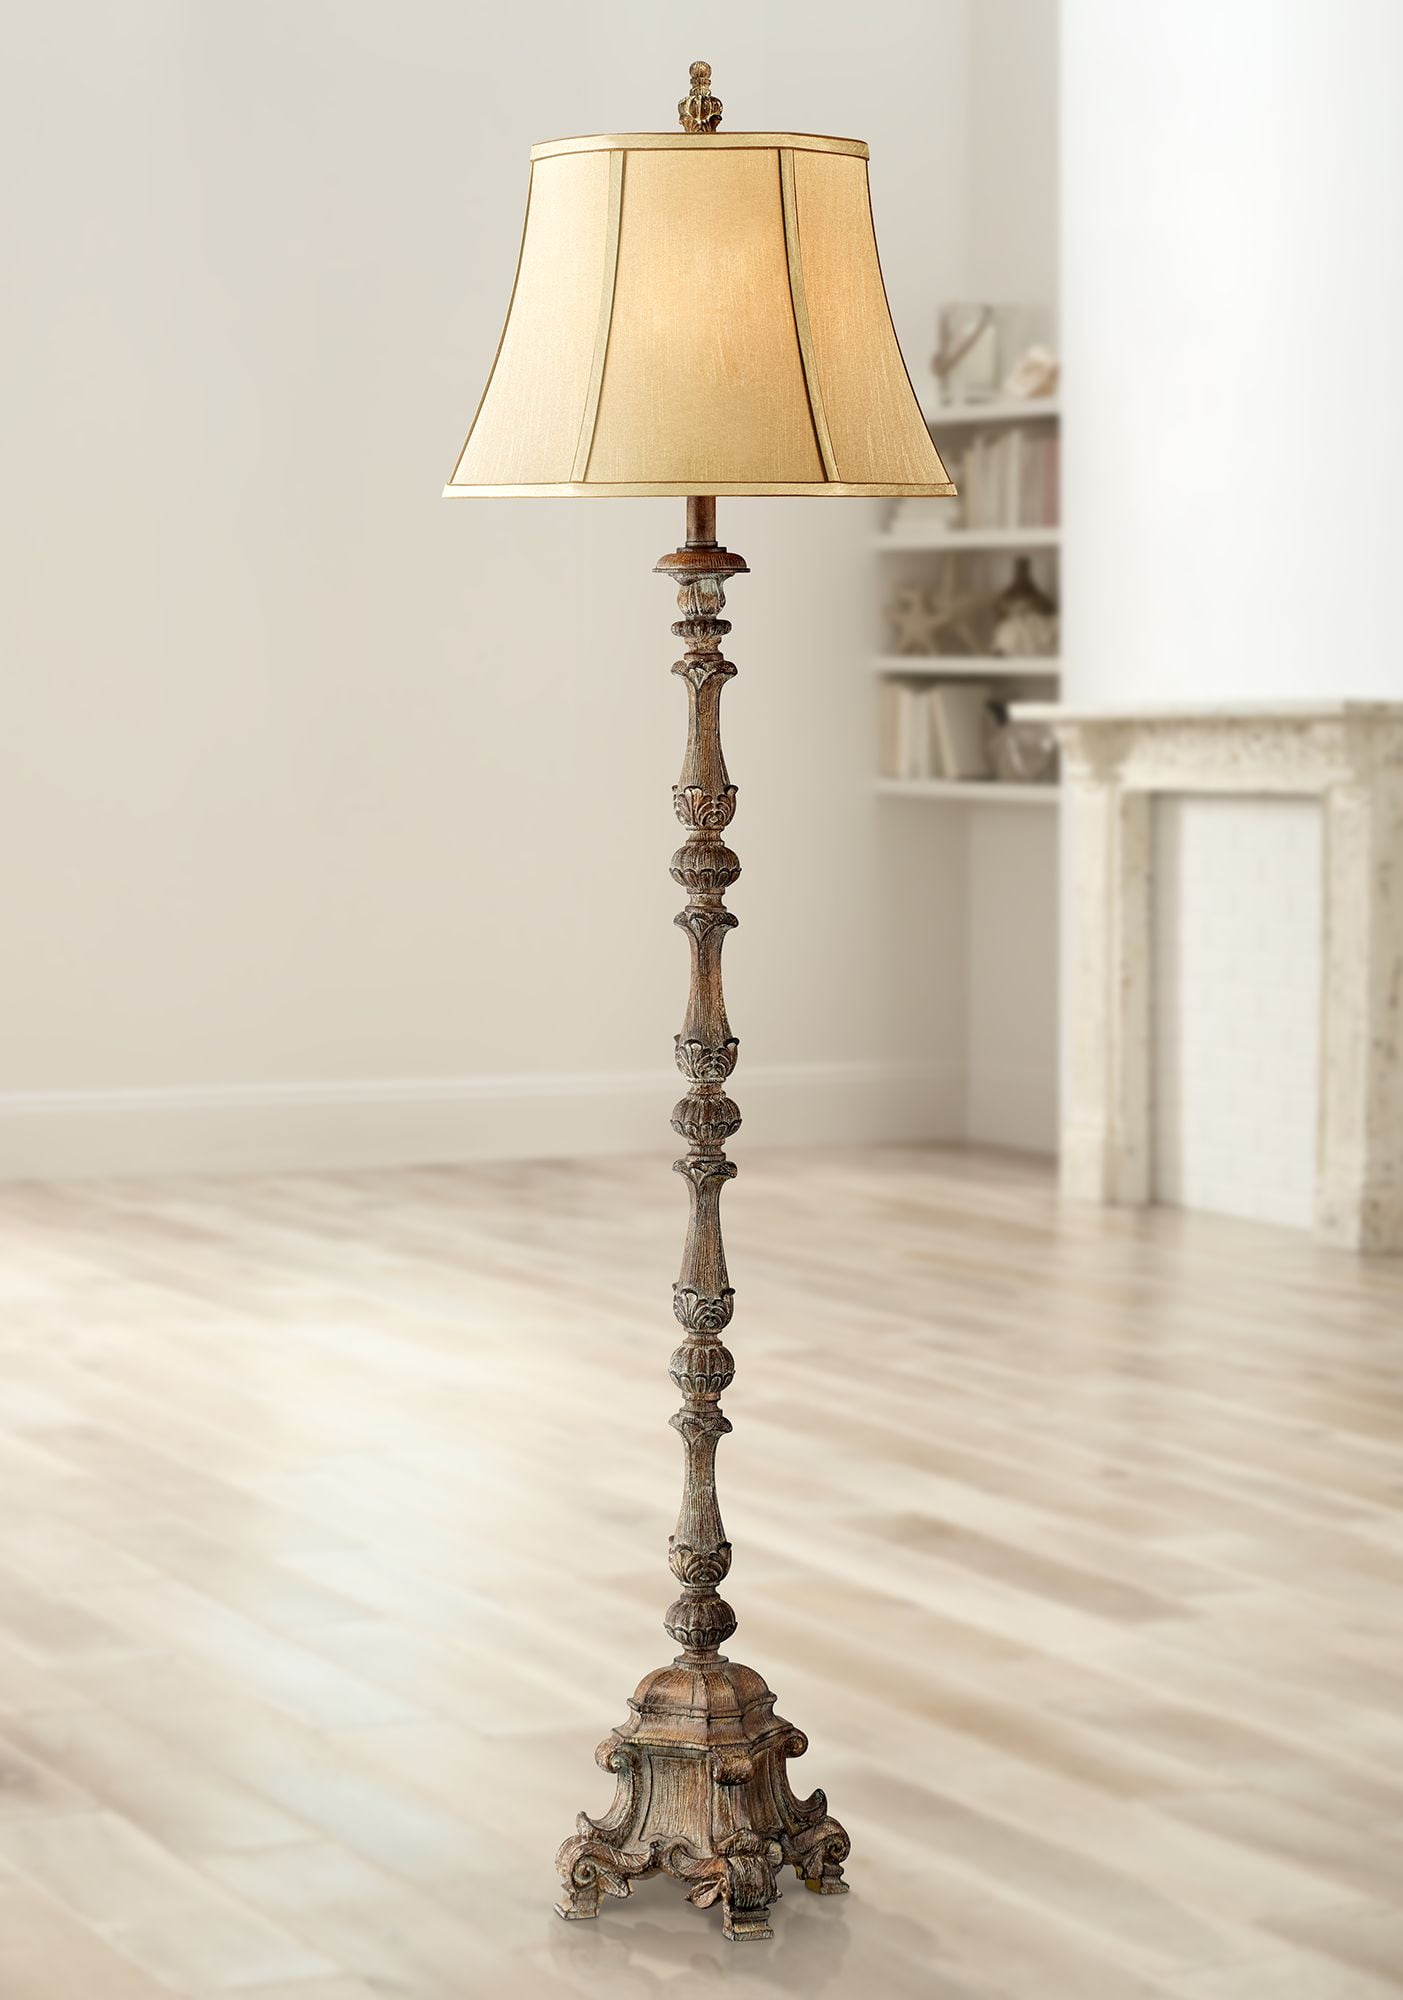 Regency Hill Rustic Floor Lamp French Faux Wood Antique Candlestick